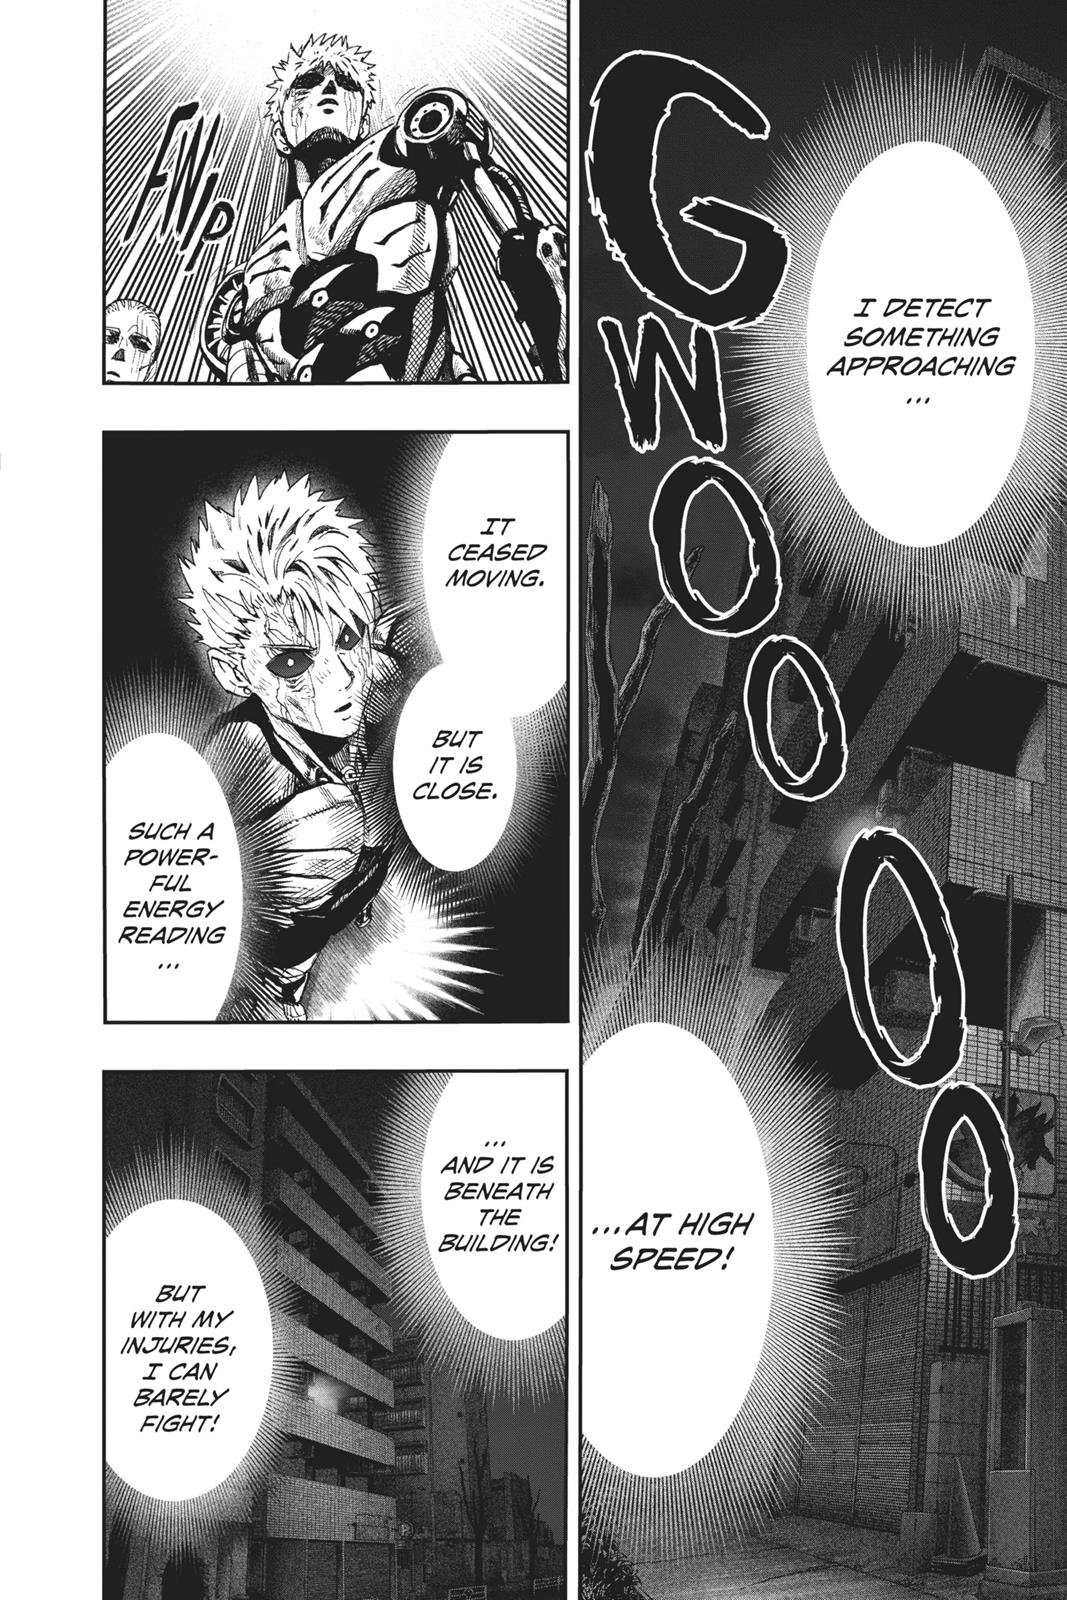 One-Punch Man, Punch 90 image 14